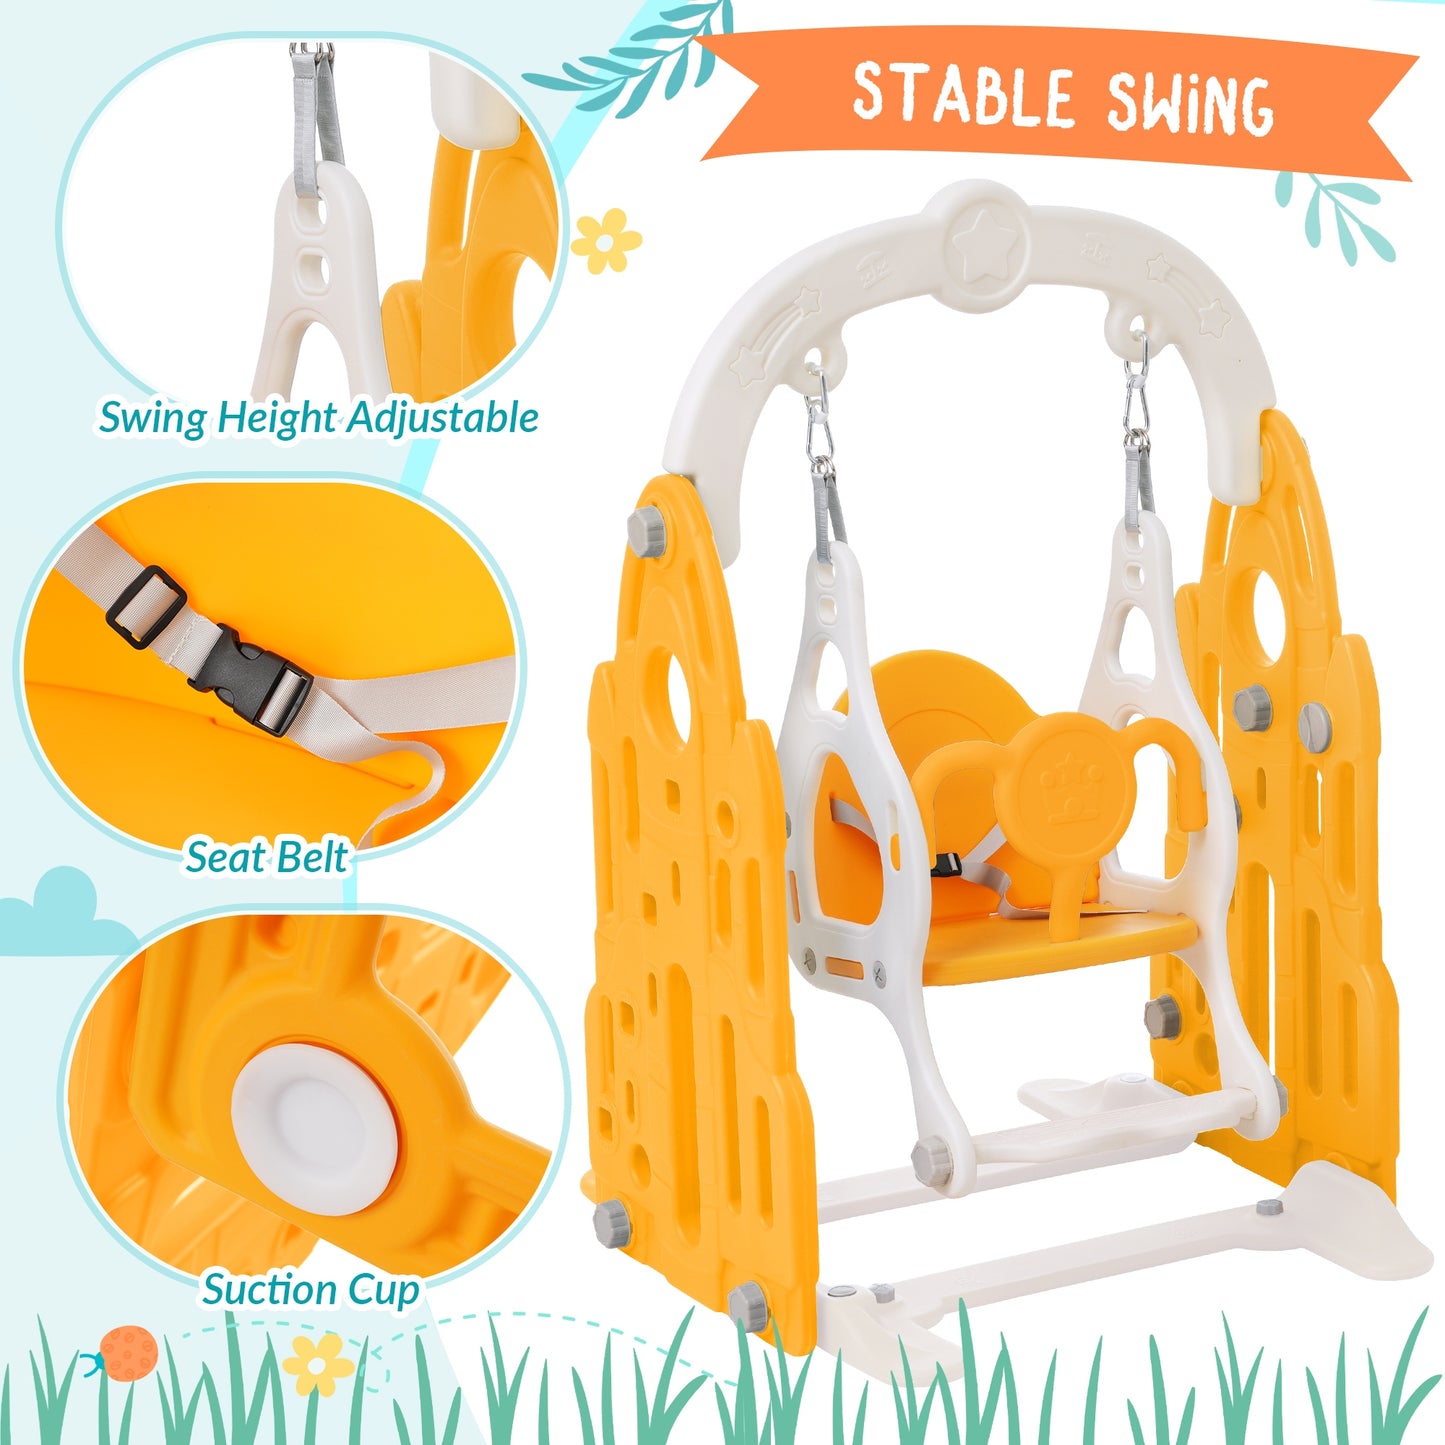 US 4 In 1 Toddler Slide Swing Set Freestanding Slide Climber Playset With Basketball Hoop Indoor Outdoor Playground Equipment For Kids Gifts yellow